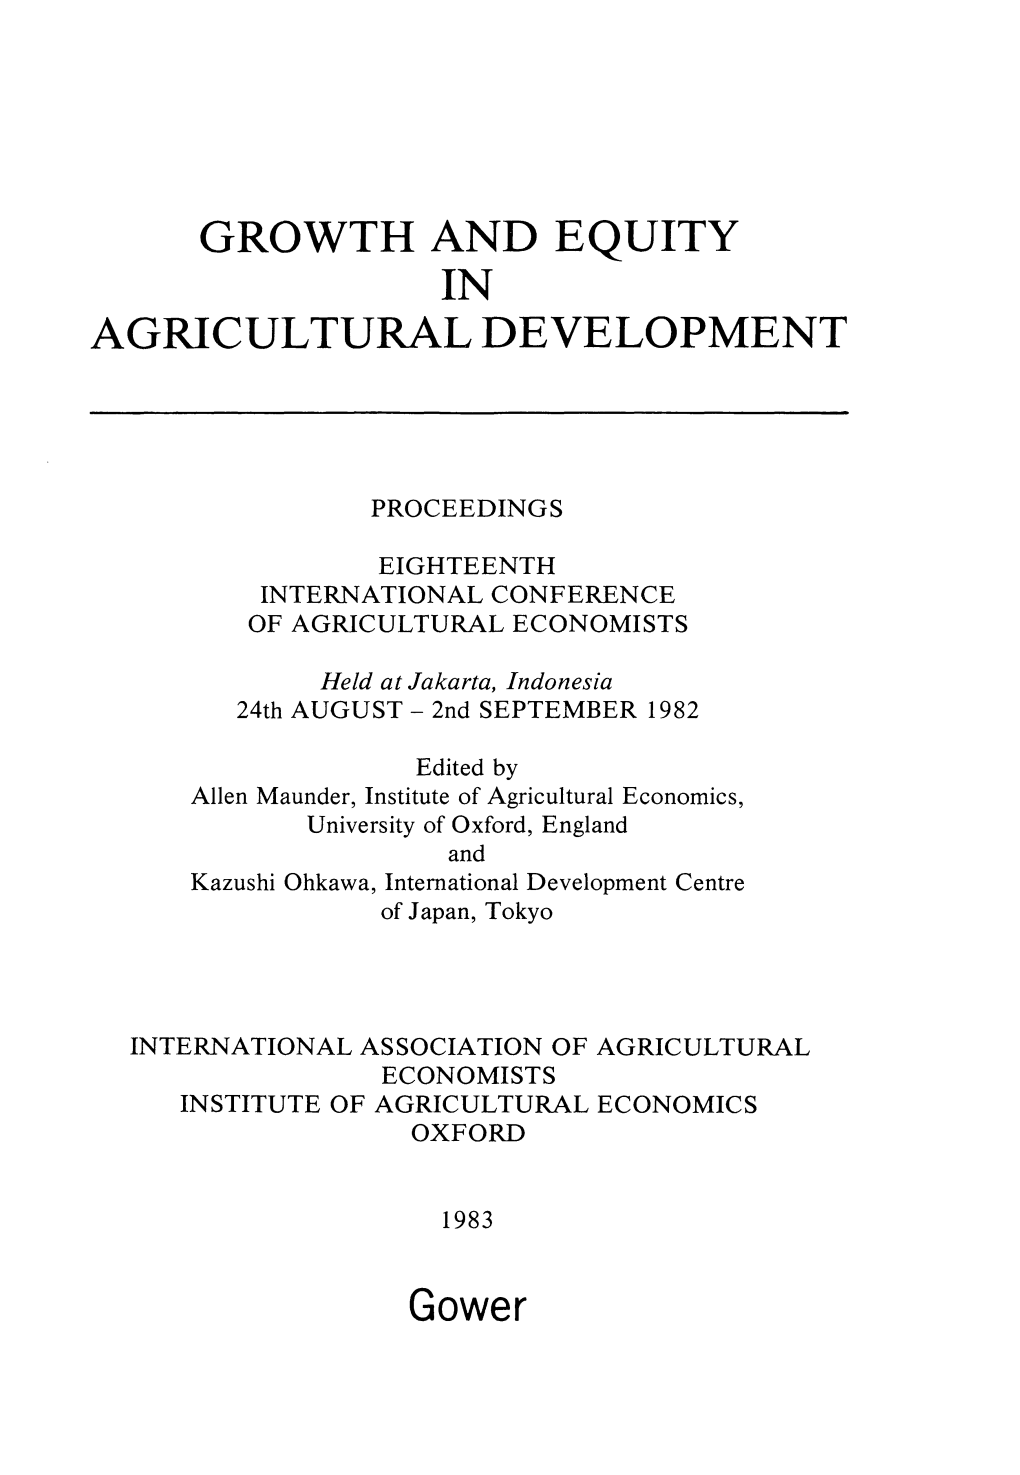 Growth and Equity in Agricultural Development